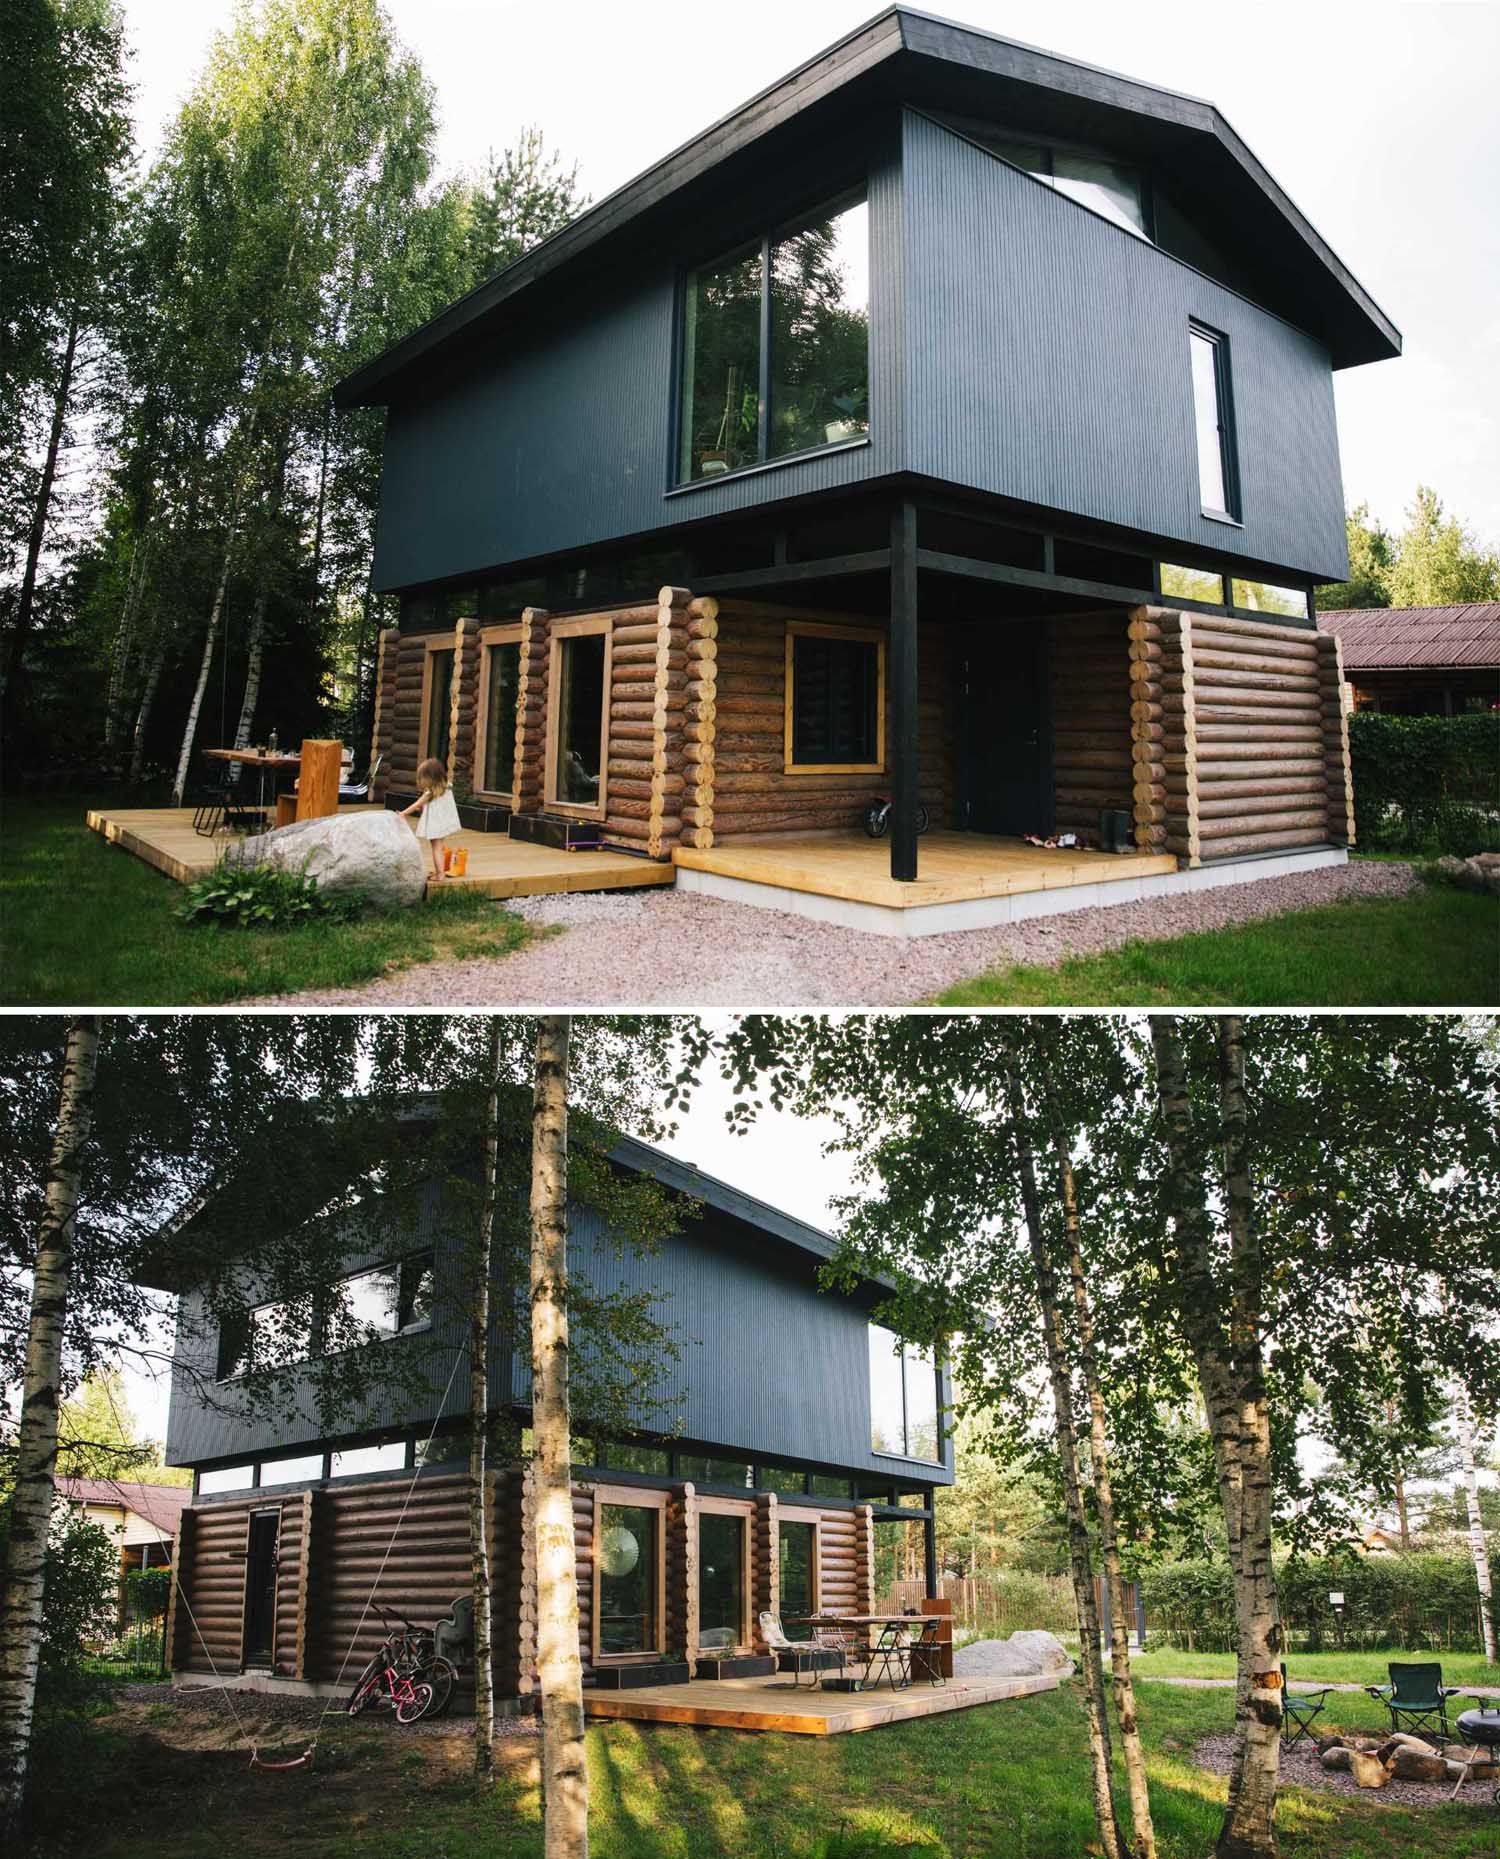 A log home topped with a modern black upper floor.